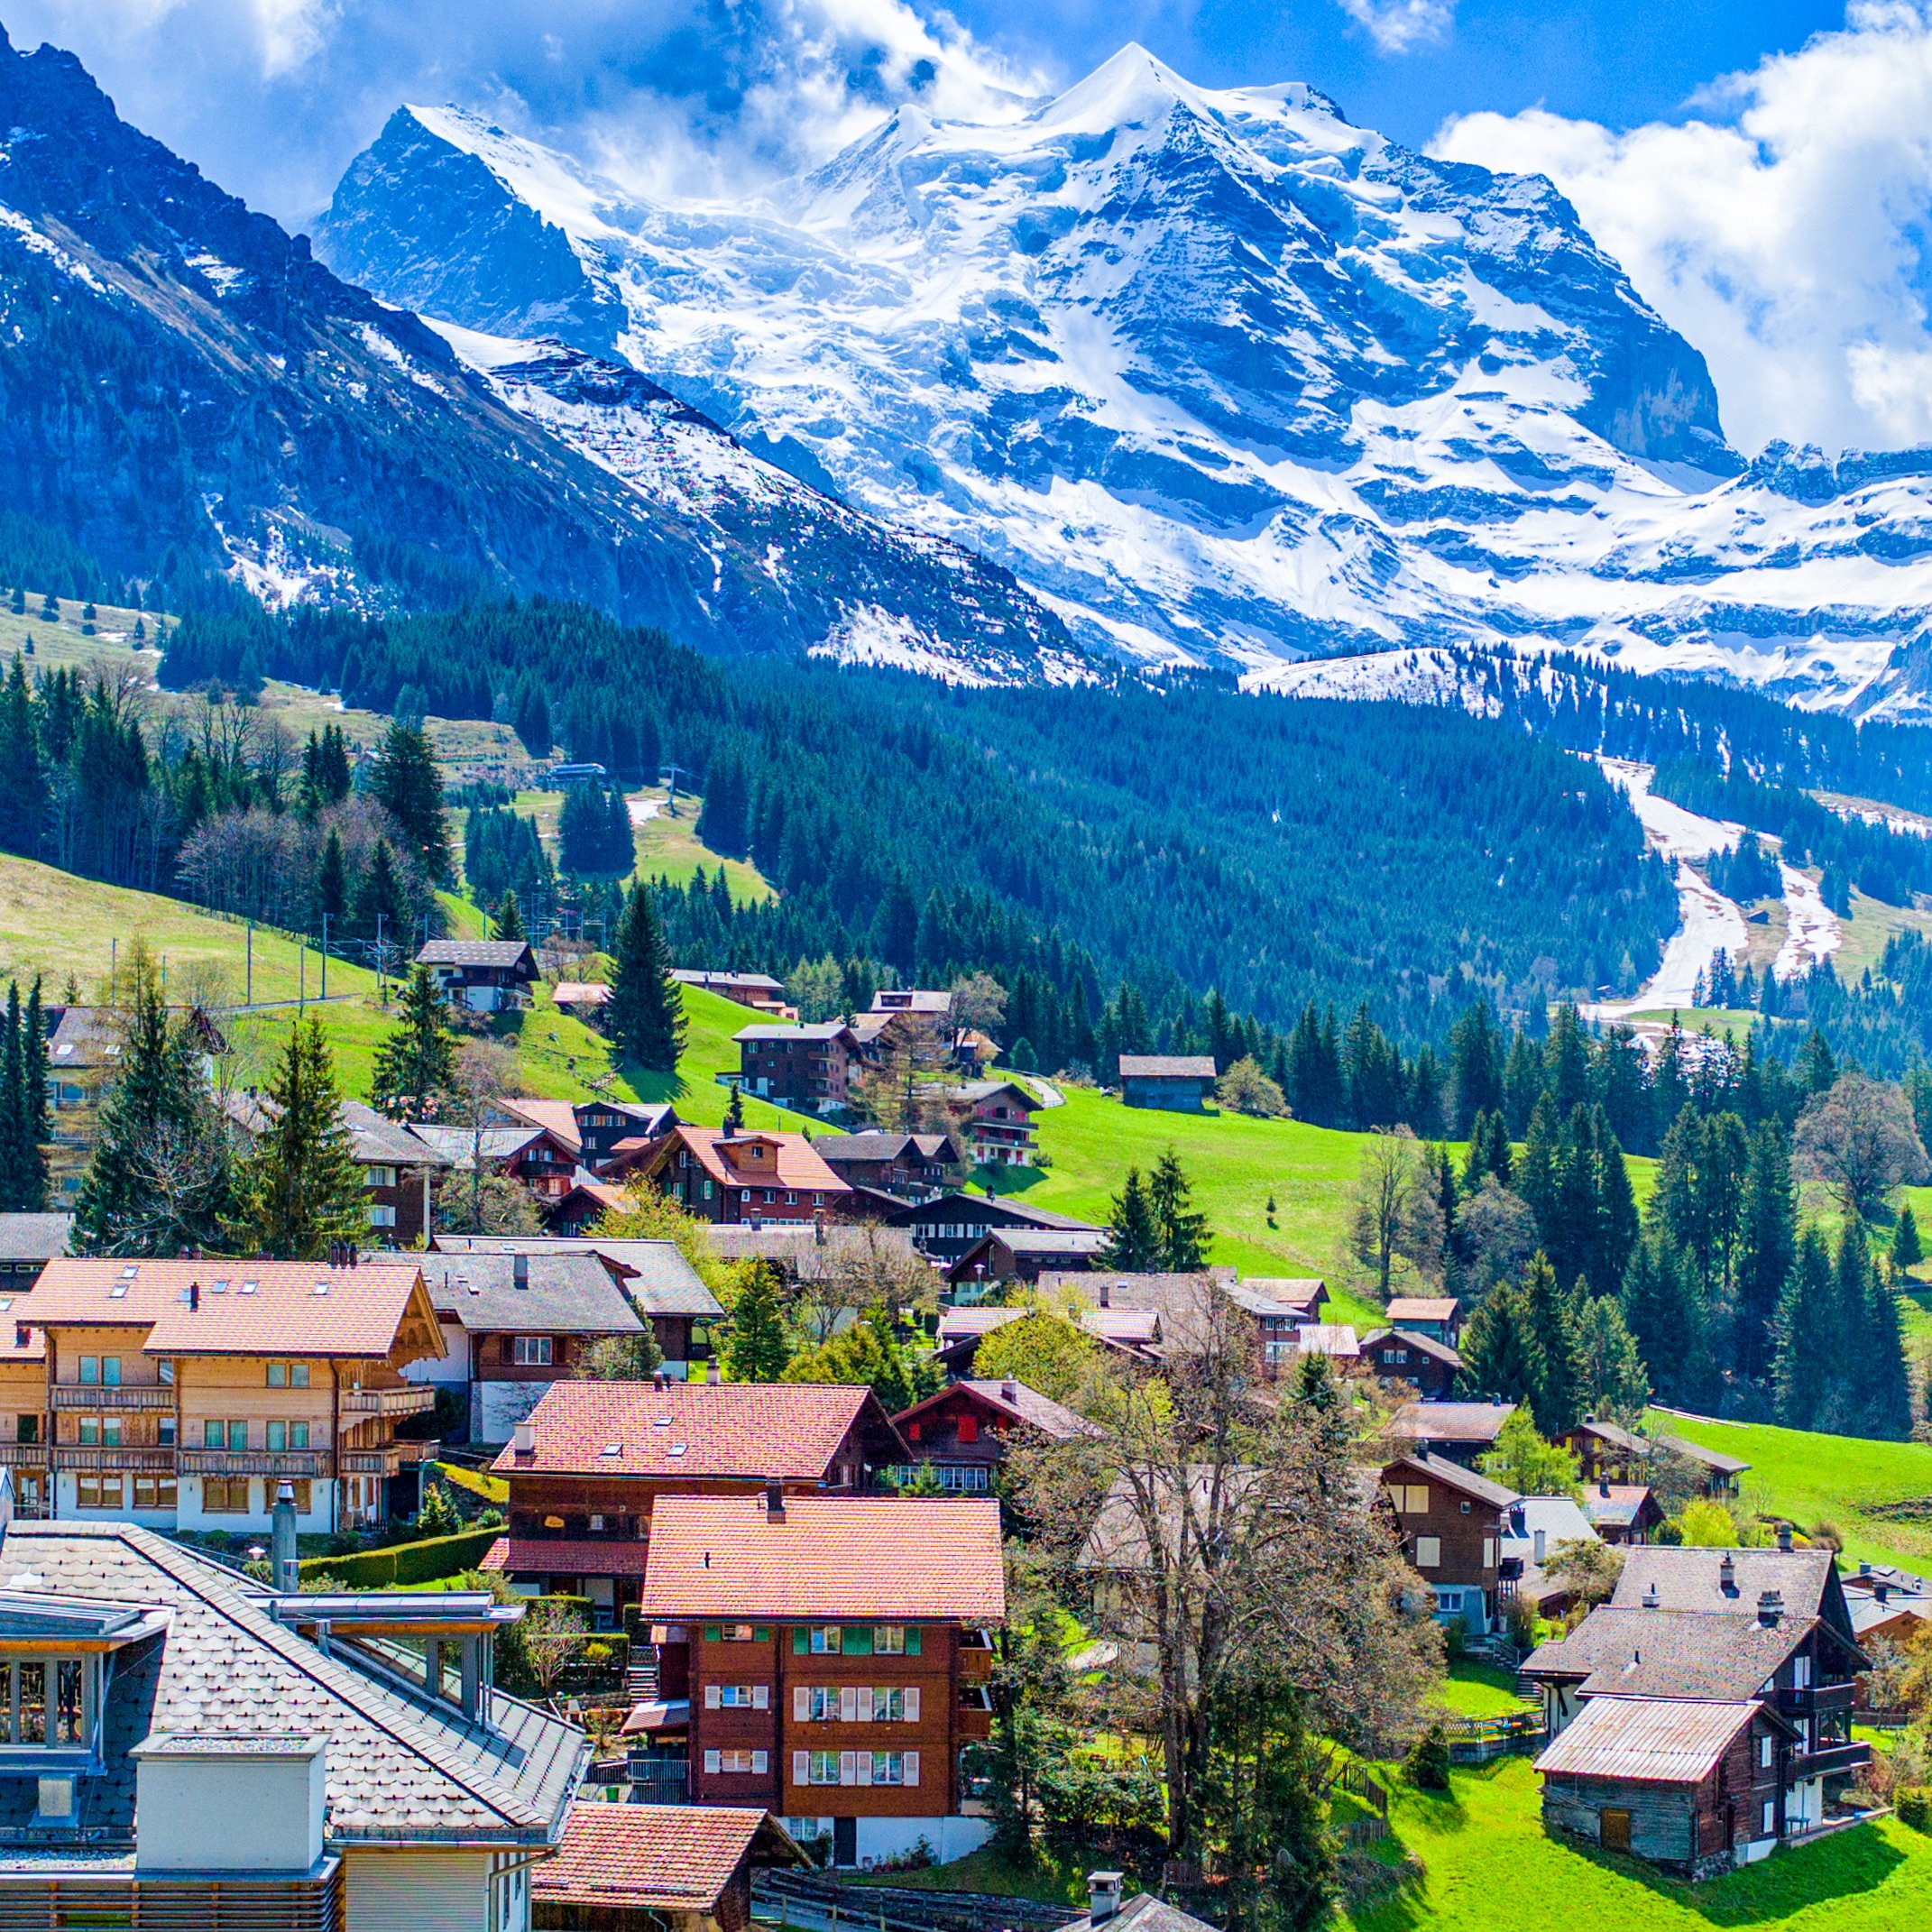 Why choose the Alps for your next summer adventure